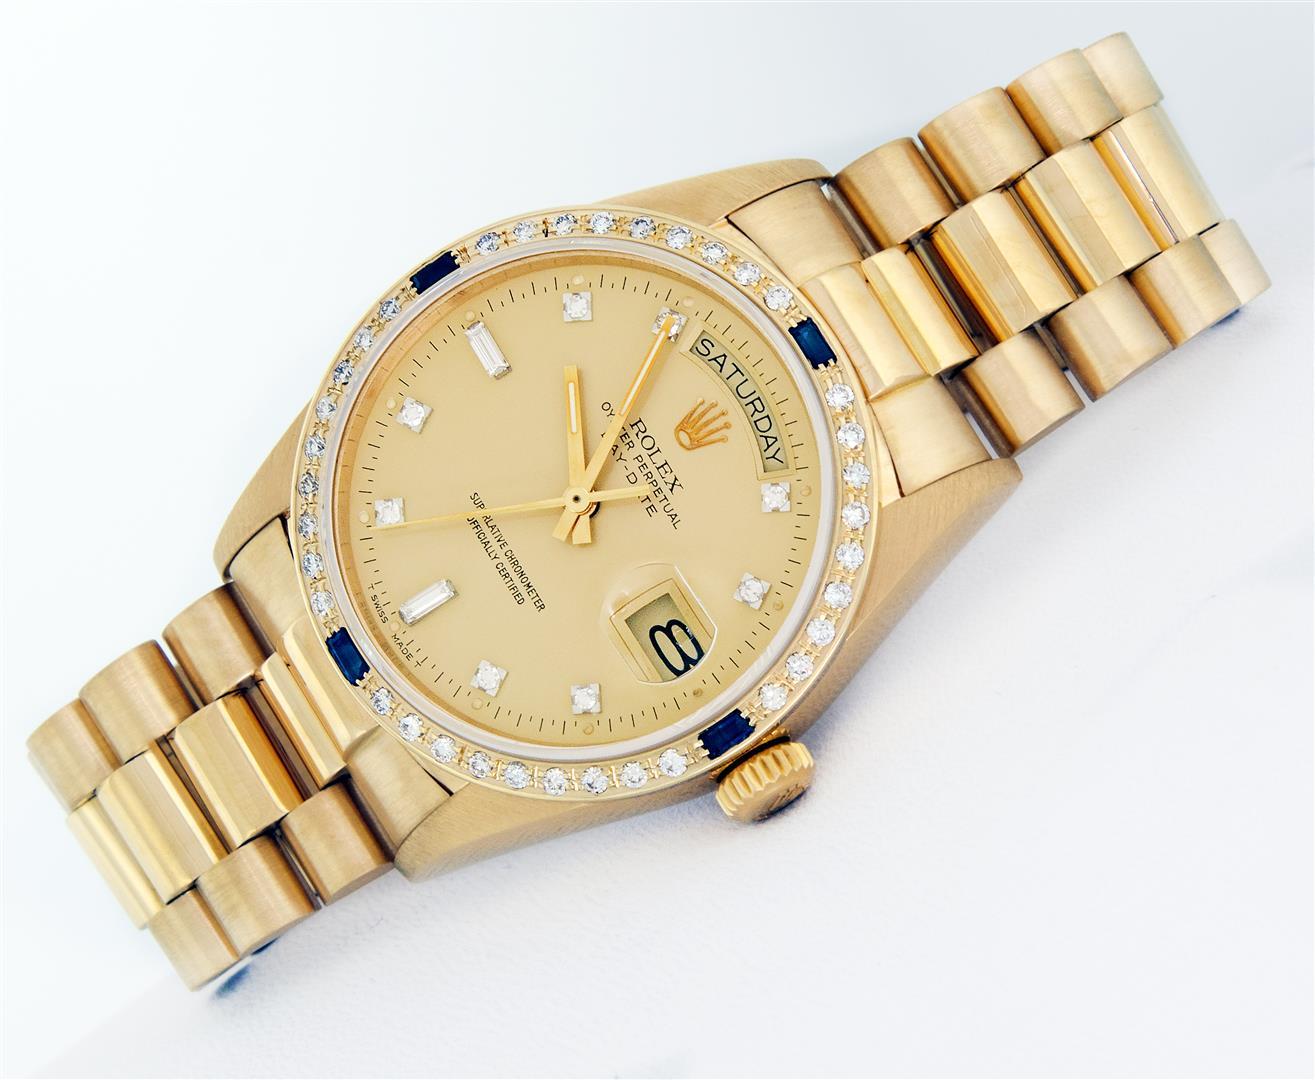 Rolex Mens Quickset 18K Yellow Gold Factory Champagne Diamond Dial Day Date Pres